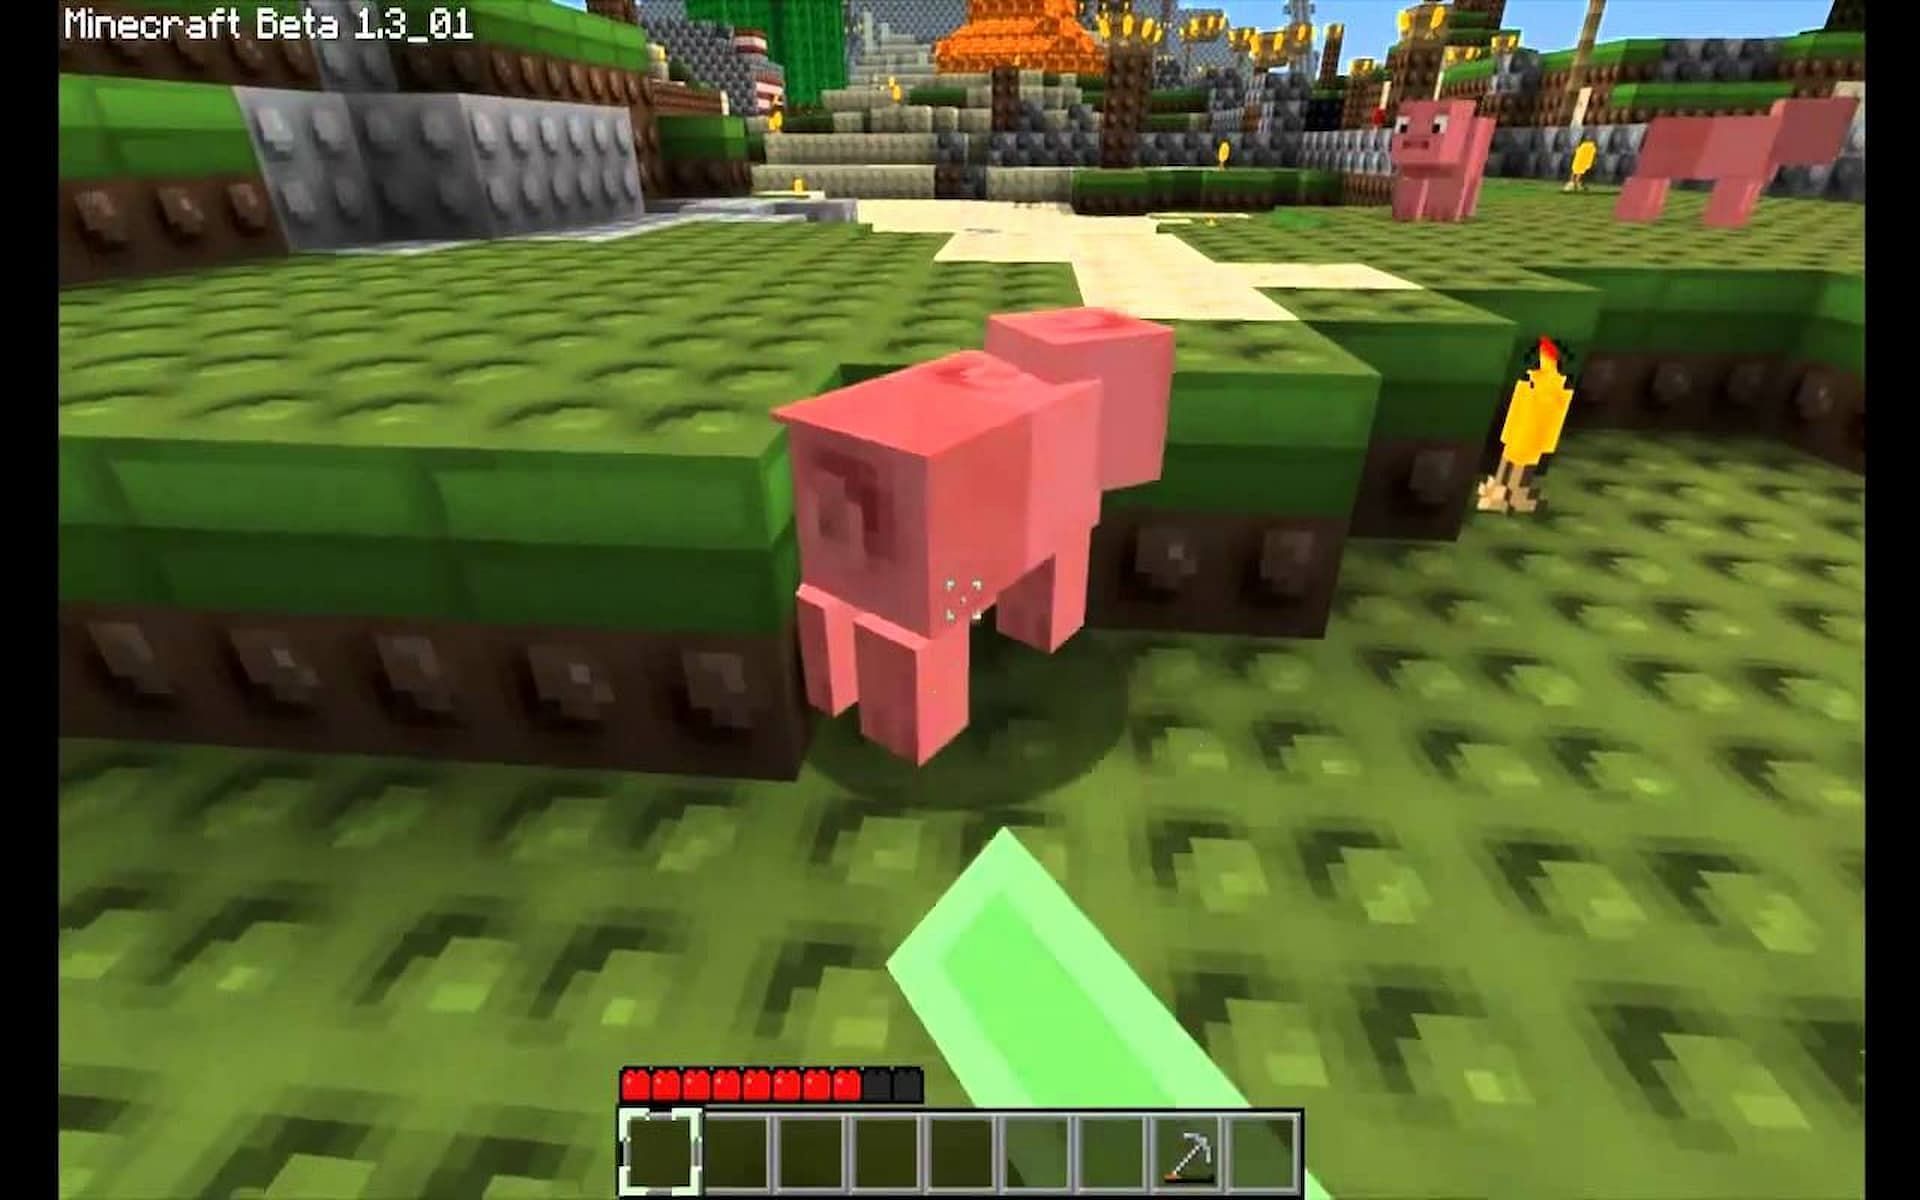 Texture packs can greatly change how the game looks (Image via YouTube/paulsoaresjr)